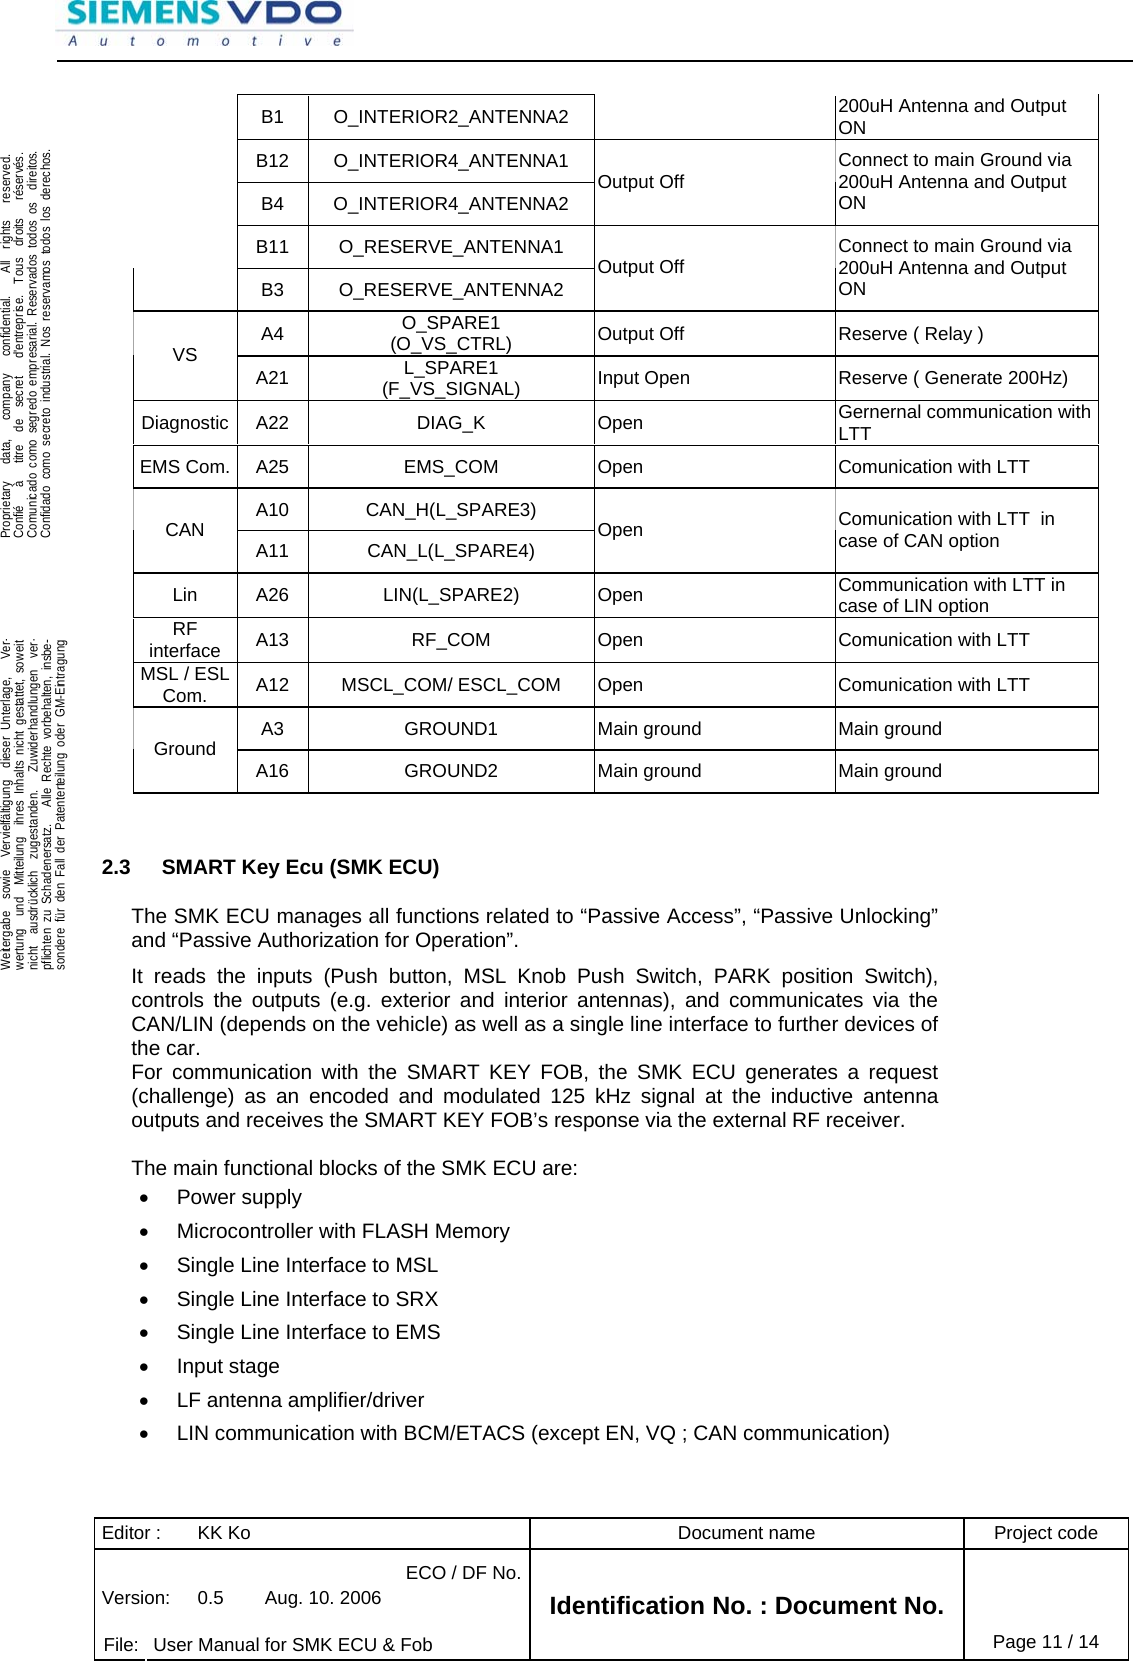 Editor :  KK Ko  Document name  Project code ECO / DF No.Version:  0.5  Aug. 10. 2006    File:  User Manual for SMK ECU &amp; Fob Identification No. : Document No. Page 11 / 14    .Proprietary   data,   company   confidential.    All  rights   reserved.Confié   à   titre  de  secret   d&apos;entreprise.  Tous  droits   réservés.Comunicado como segredo empresarial. Reservados todos os  direitos.Confidado como secreto industrial. Nos reservamos todos los derechos.  .Weitergabe  sowie  Vervielfältigung  dieser Unterlage,   Ver-wertung  und  Mitteilung  ihres Inhalts nicht gestattet, soweitnicht  ausdrücklich  zugestanden.   Zuwiderhandlungen  ver-pflichten zu Schadenersatz.   Alle Rechte vorbehalten, insbe-sondere für den Fall der Patenterteilung oder GM-Eintragung  B1 O_INTERIOR2_ANTENNA2  200uH Antenna and Output ON B12 O_INTERIOR4_ANTENNA1 B4 O_INTERIOR4_ANTENNA2 Output Off  Connect to main Ground via 200uH Antenna and Output ON B11 O_RESERVE_ANTENNA1 B3 O_RESERVE_ANTENNA2 Output Off  Connect to main Ground via 200uH Antenna and Output ON A4  O_SPARE1 (O_VS_CTRL)  Output Off  Reserve ( Relay ) VS A21  L_SPARE1 (F_VS_SIGNAL)  Input Open  Reserve ( Generate 200Hz) Diagnostic  A22  DIAG_K  Open  Gernernal communication with LTT EMS Com.  A25  EMS_COM  Open  Comunication with LTT A10  CAN_H(L_SPARE3) CAN  A11  CAN_L(L_SPARE4)  Open  Comunication with LTT  in case of CAN option Lin  A26  LIN(L_SPARE2)  Open  Communication with LTT in case of LIN option RF interface  A13  RF_COM  Open  Comunication with LTT MSL / ESL Com.  A12  MSCL_COM/ ESCL_COM  Open  Comunication with LTT A3  GROUND1  Main ground  Main ground Ground  A16  GROUND2  Main ground  Main ground  2.3  SMART Key Ecu (SMK ECU) The SMK ECU manages all functions related to “Passive Access”, “Passive Unlocking” and “Passive Authorization for Operation”.  It reads the inputs (Push button, MSL Knob Push Switch, PARK position Switch), controls the outputs (e.g. exterior and interior antennas), and communicates via the CAN/LIN (depends on the vehicle) as well as a single line interface to further devices of the car.  For communication with the SMART KEY FOB, the SMK ECU generates a request (challenge) as an encoded and modulated 125 kHz signal at the inductive antenna outputs and receives the SMART KEY FOB’s response via the external RF receiver.  The main functional blocks of the SMK ECU are: • Power supply •  Microcontroller with FLASH Memory •  Single Line Interface to MSL •  Single Line Interface to SRX •  Single Line Interface to EMS • Input stage •  LF antenna amplifier/driver •  LIN communication with BCM/ETACS (except EN, VQ ; CAN communication)  